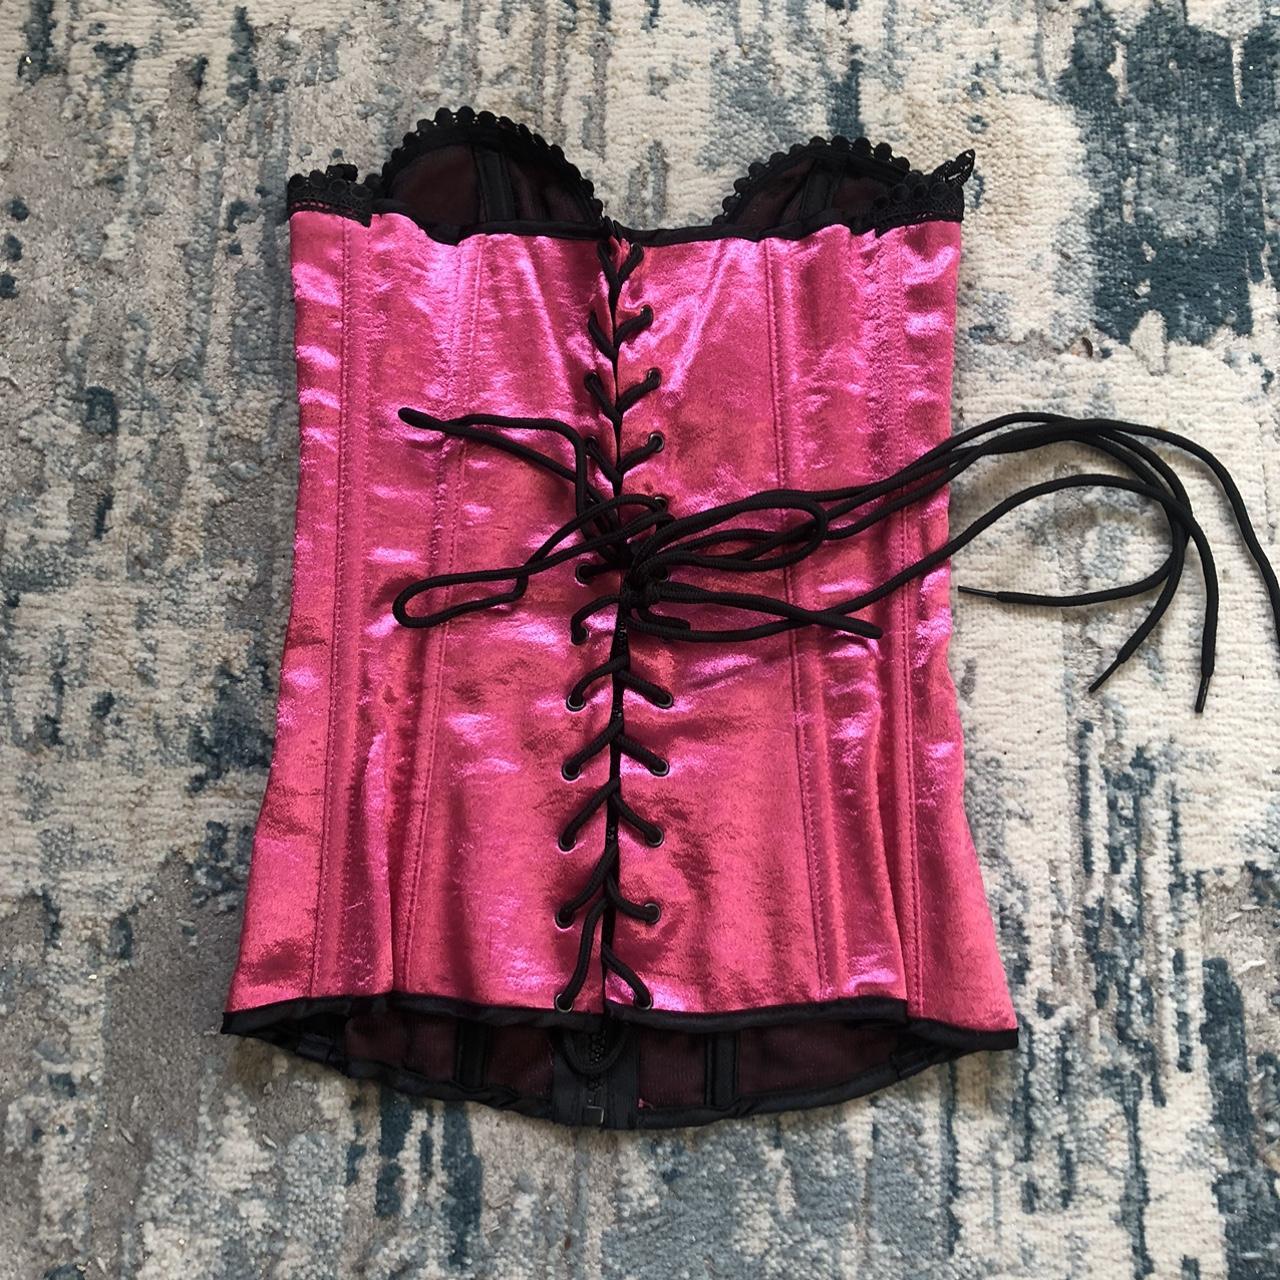 Frederick's of Hollywood Women's Pink and Black Corset | Depop